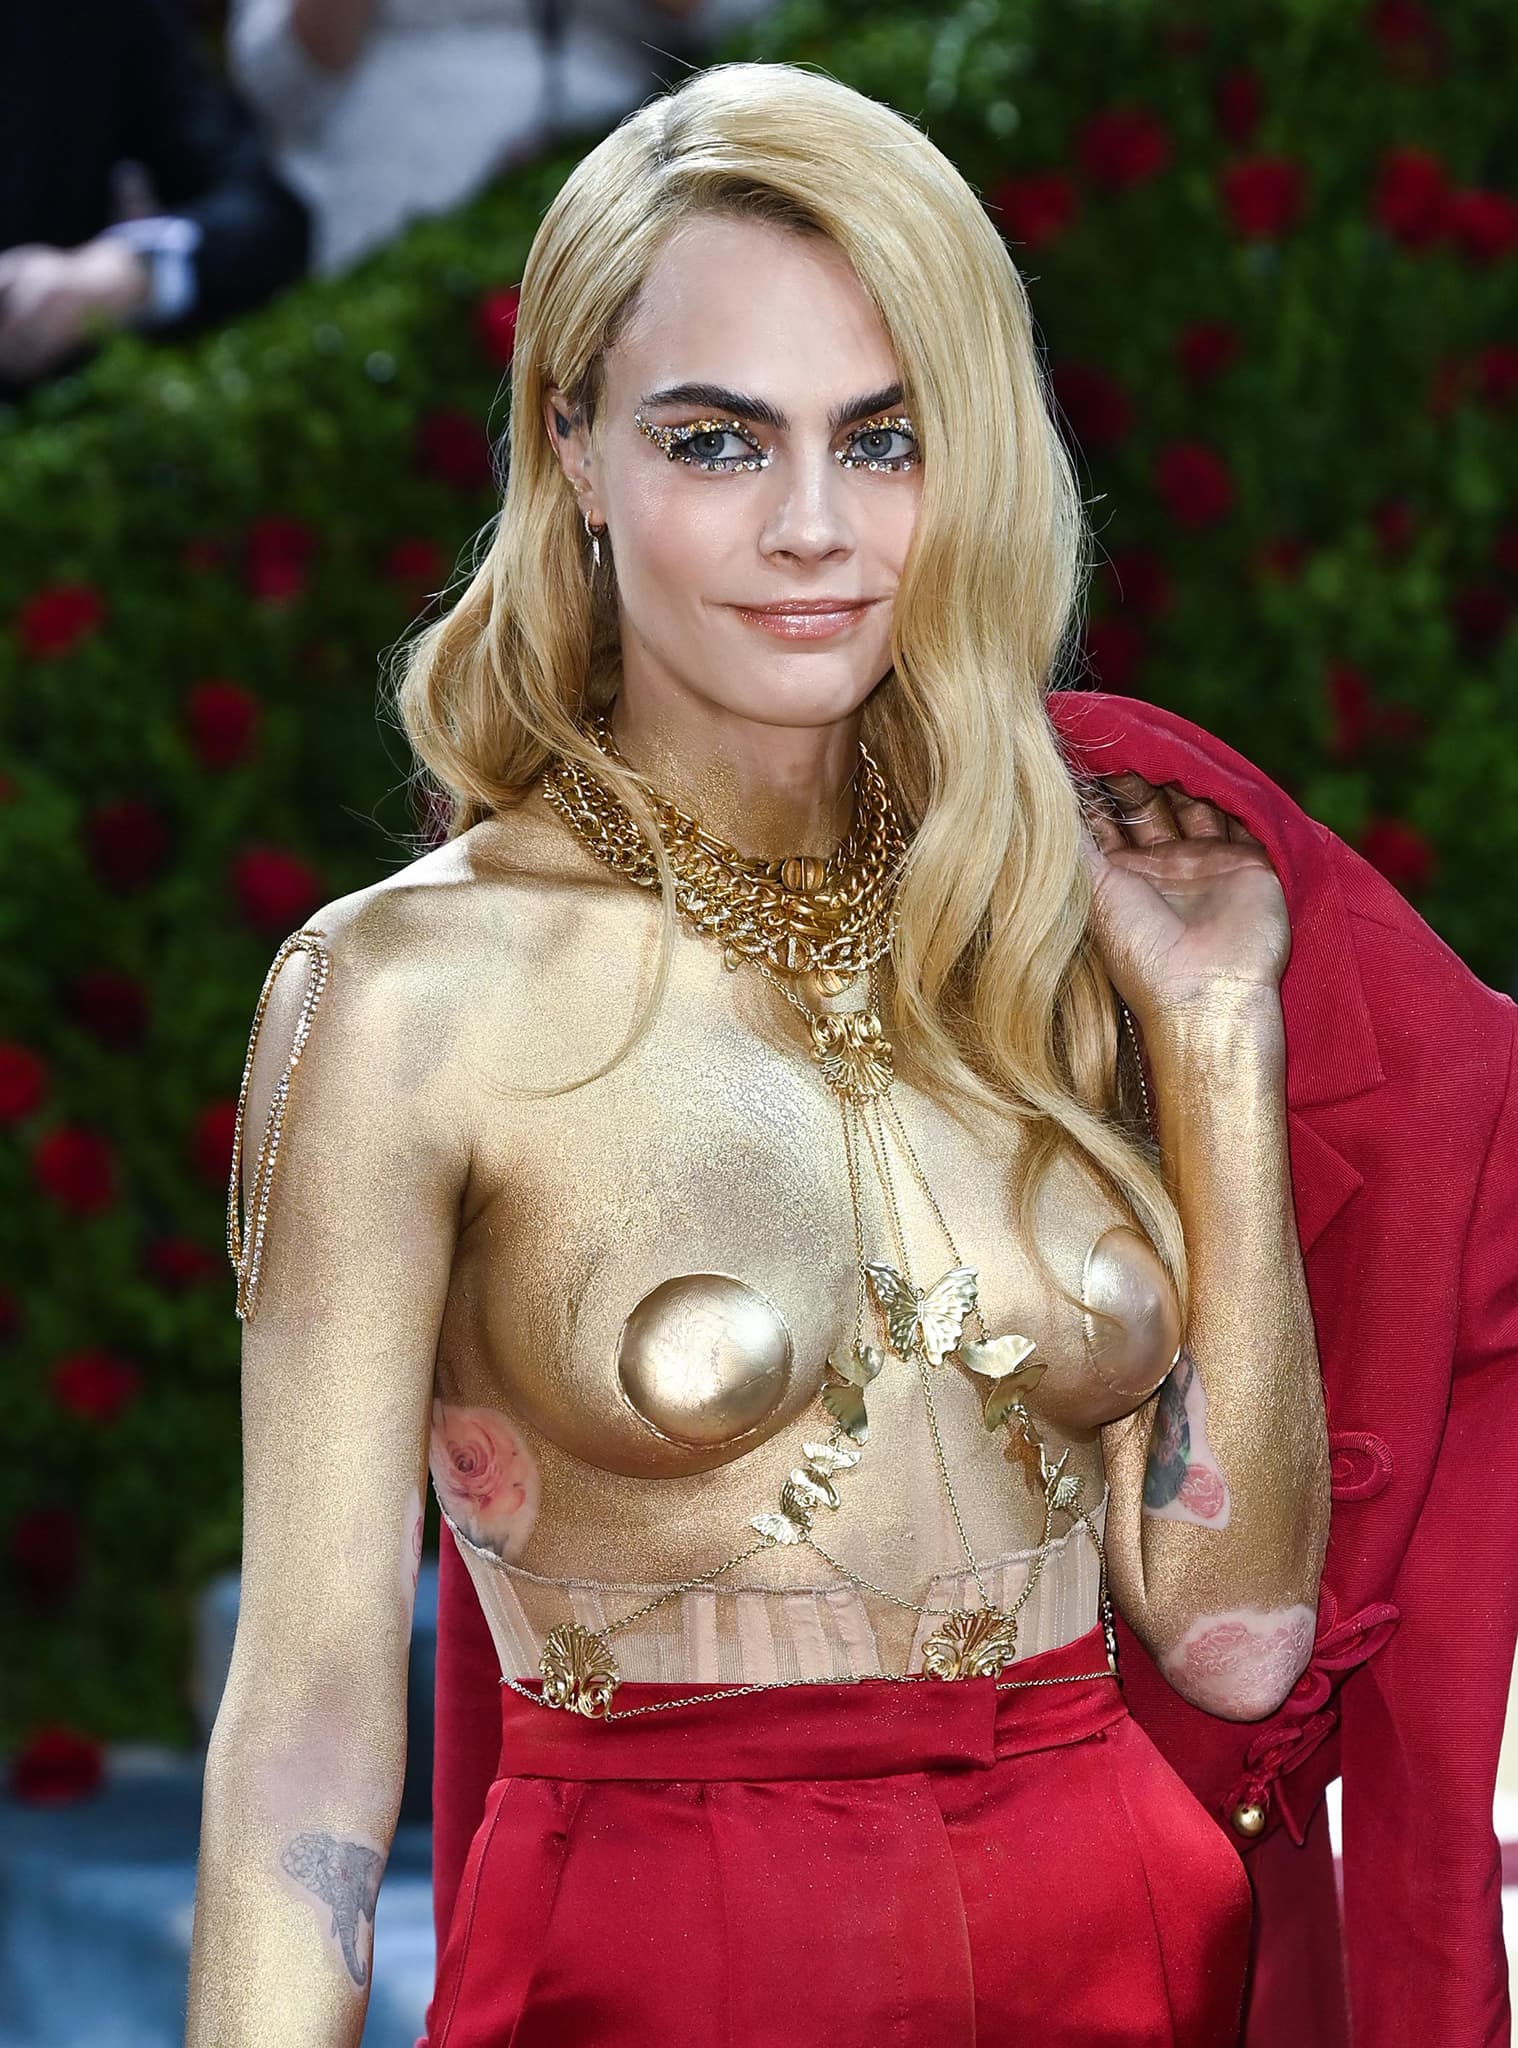 Cara Delevingne's eyes are lined with gold crystals, completing her take on gilded age look